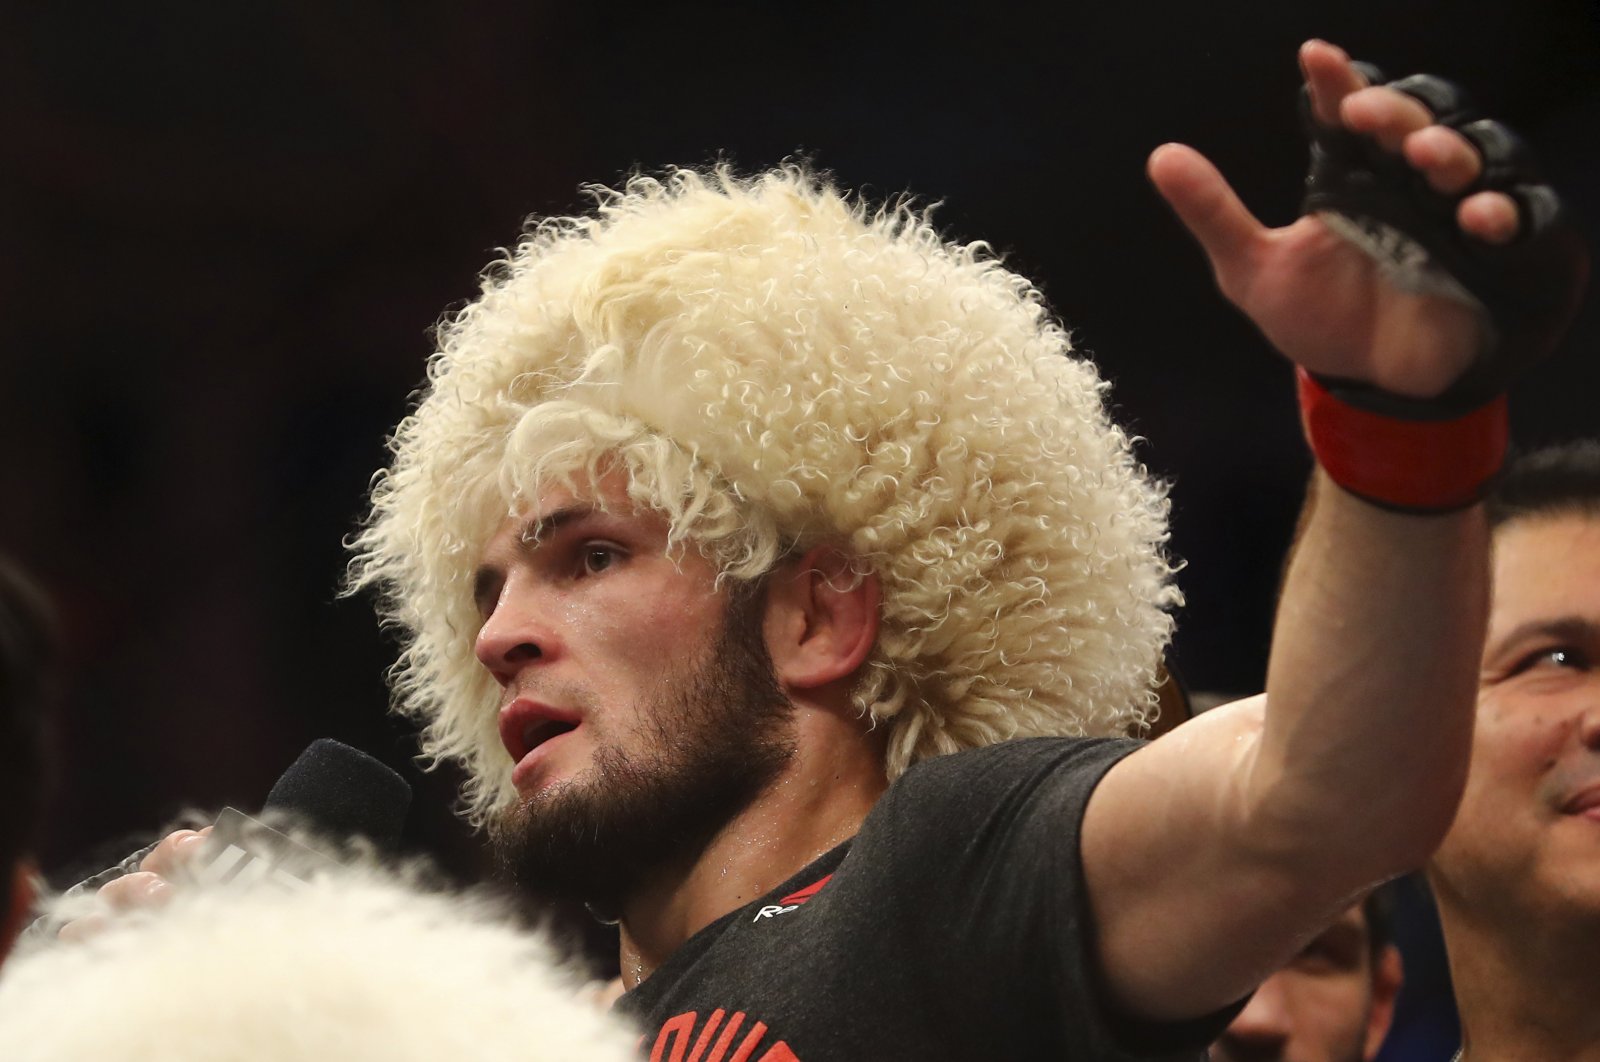 Russian UFC fighter Khabib Nurmagomedov, speaks after wining against UFC fighter Dustin Poirier during Lightweight title mixed martial arts bout at UFC 242, in Yas Mall in Abu Dhabi, United Arab Emirates, Sept. 7, 2019. (AP Photo)